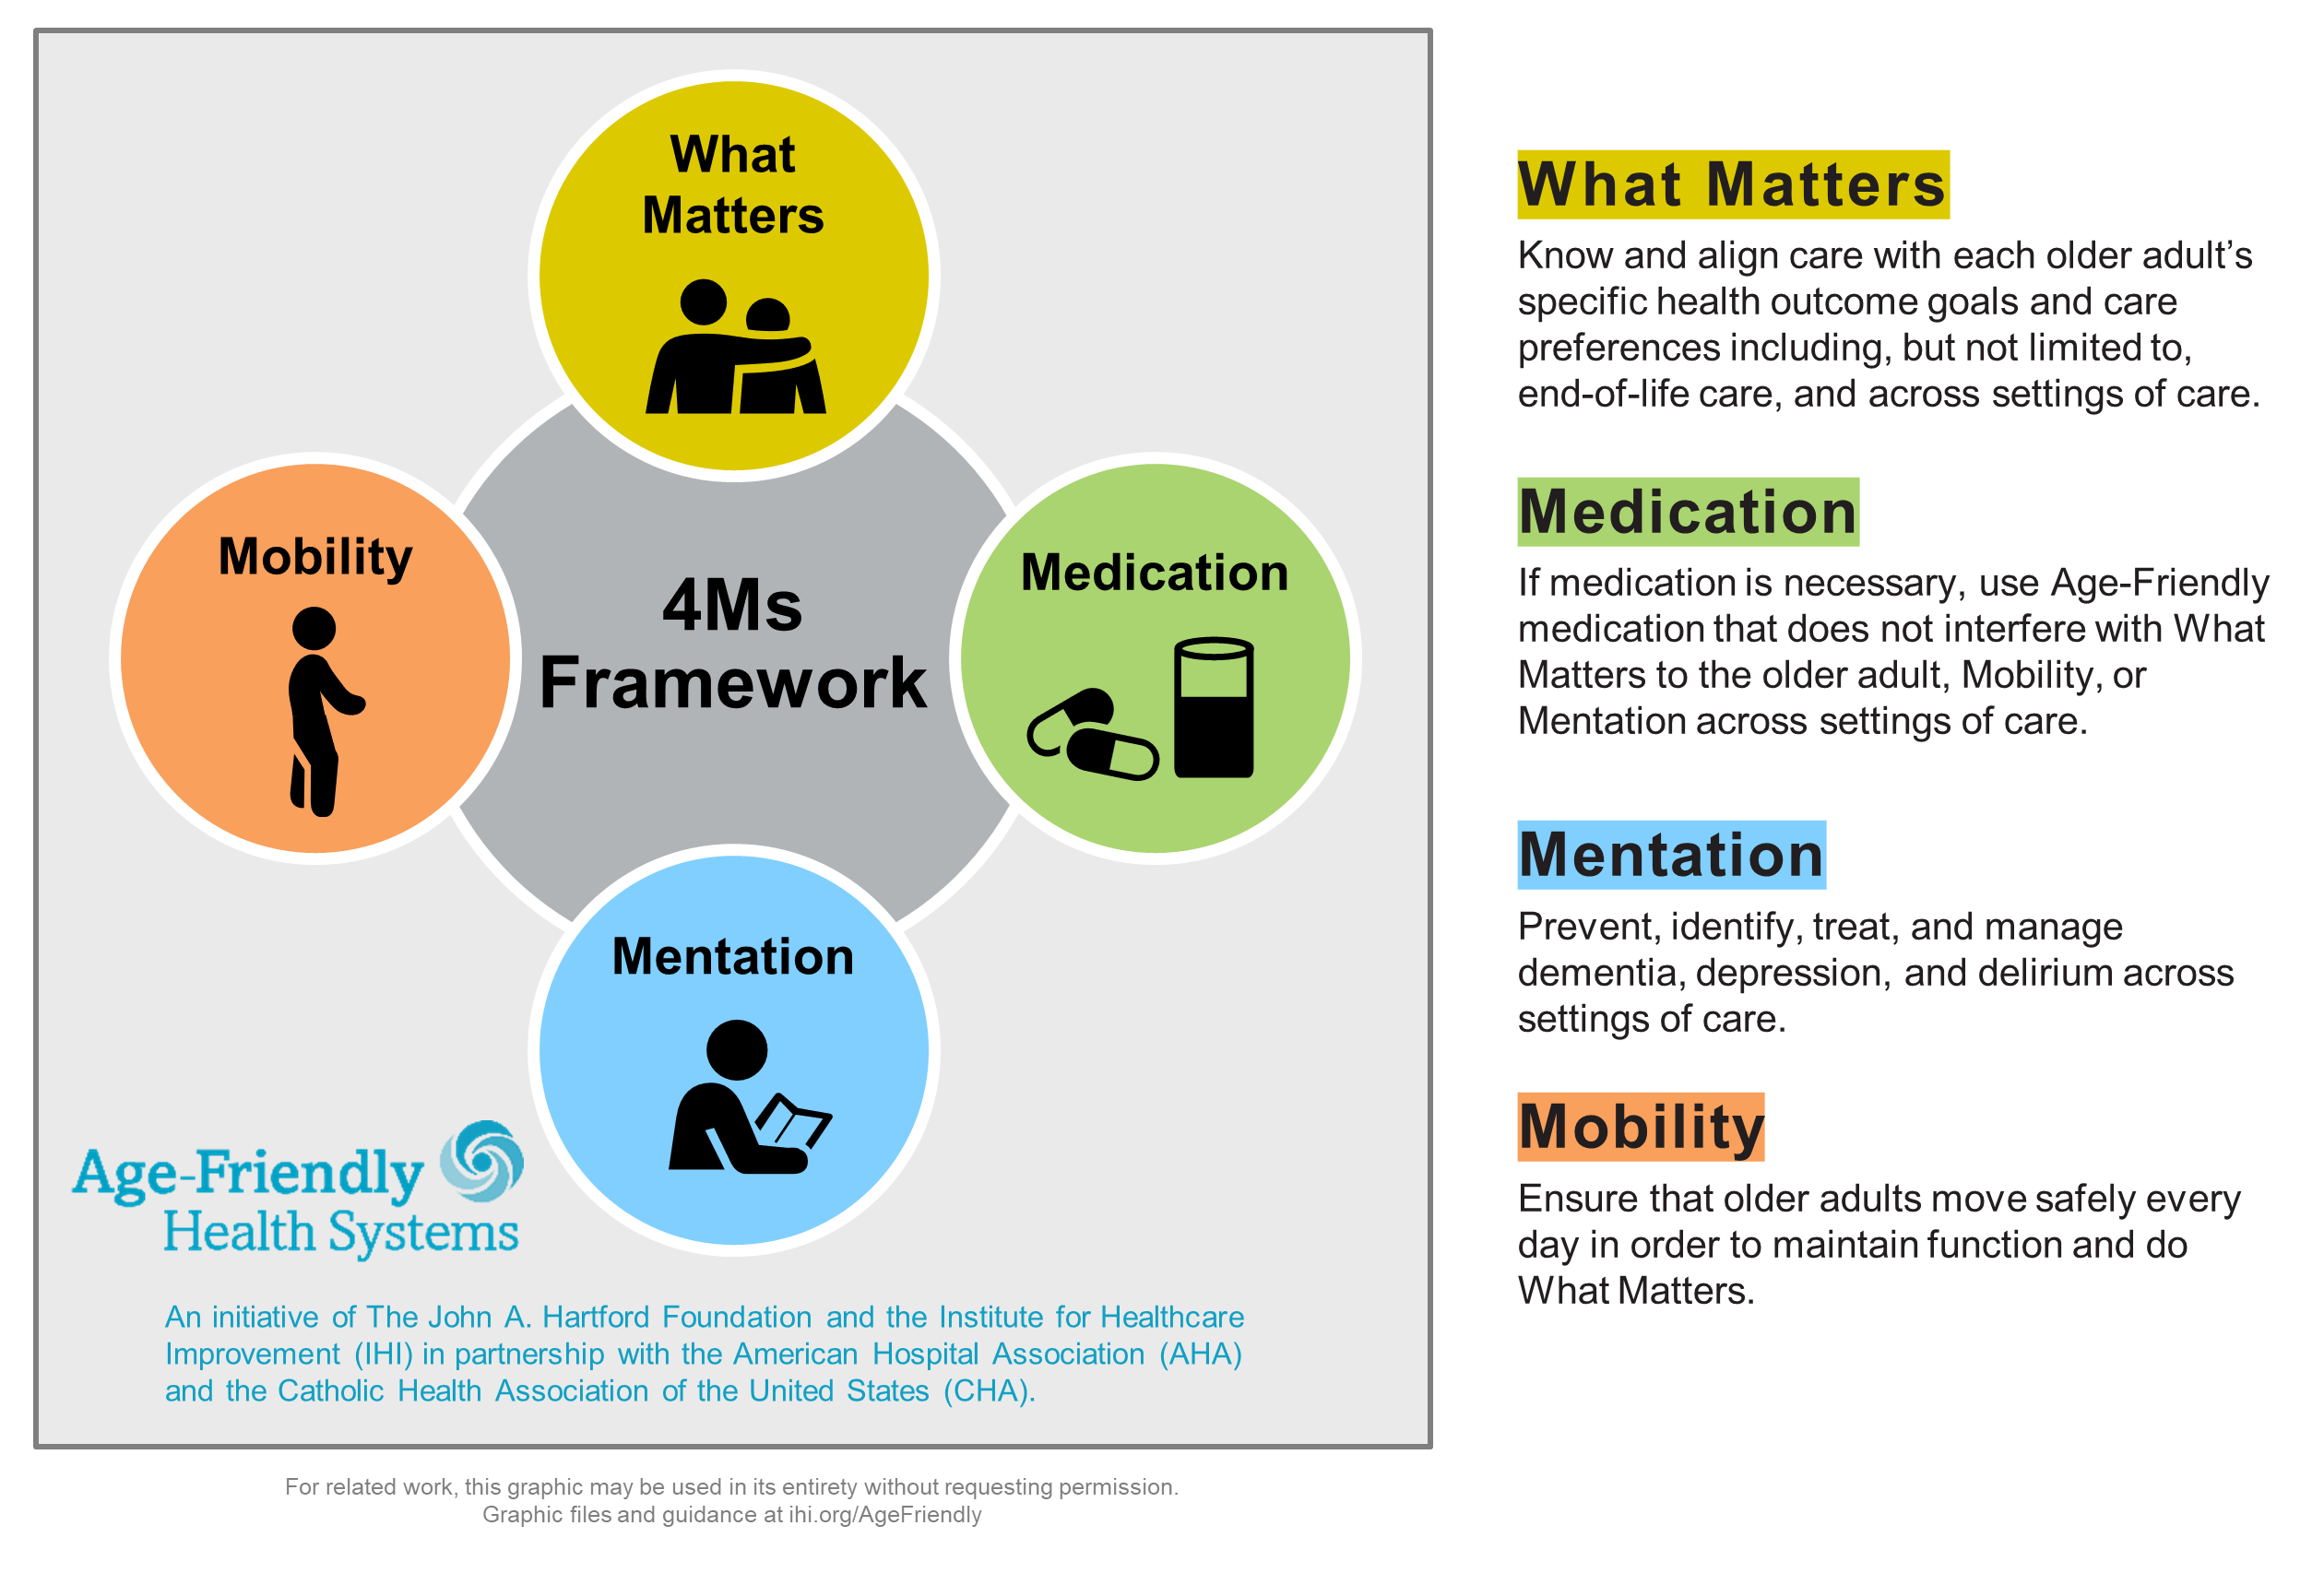 4Ms Framework of an Age-Friendly Health Systems descriptions